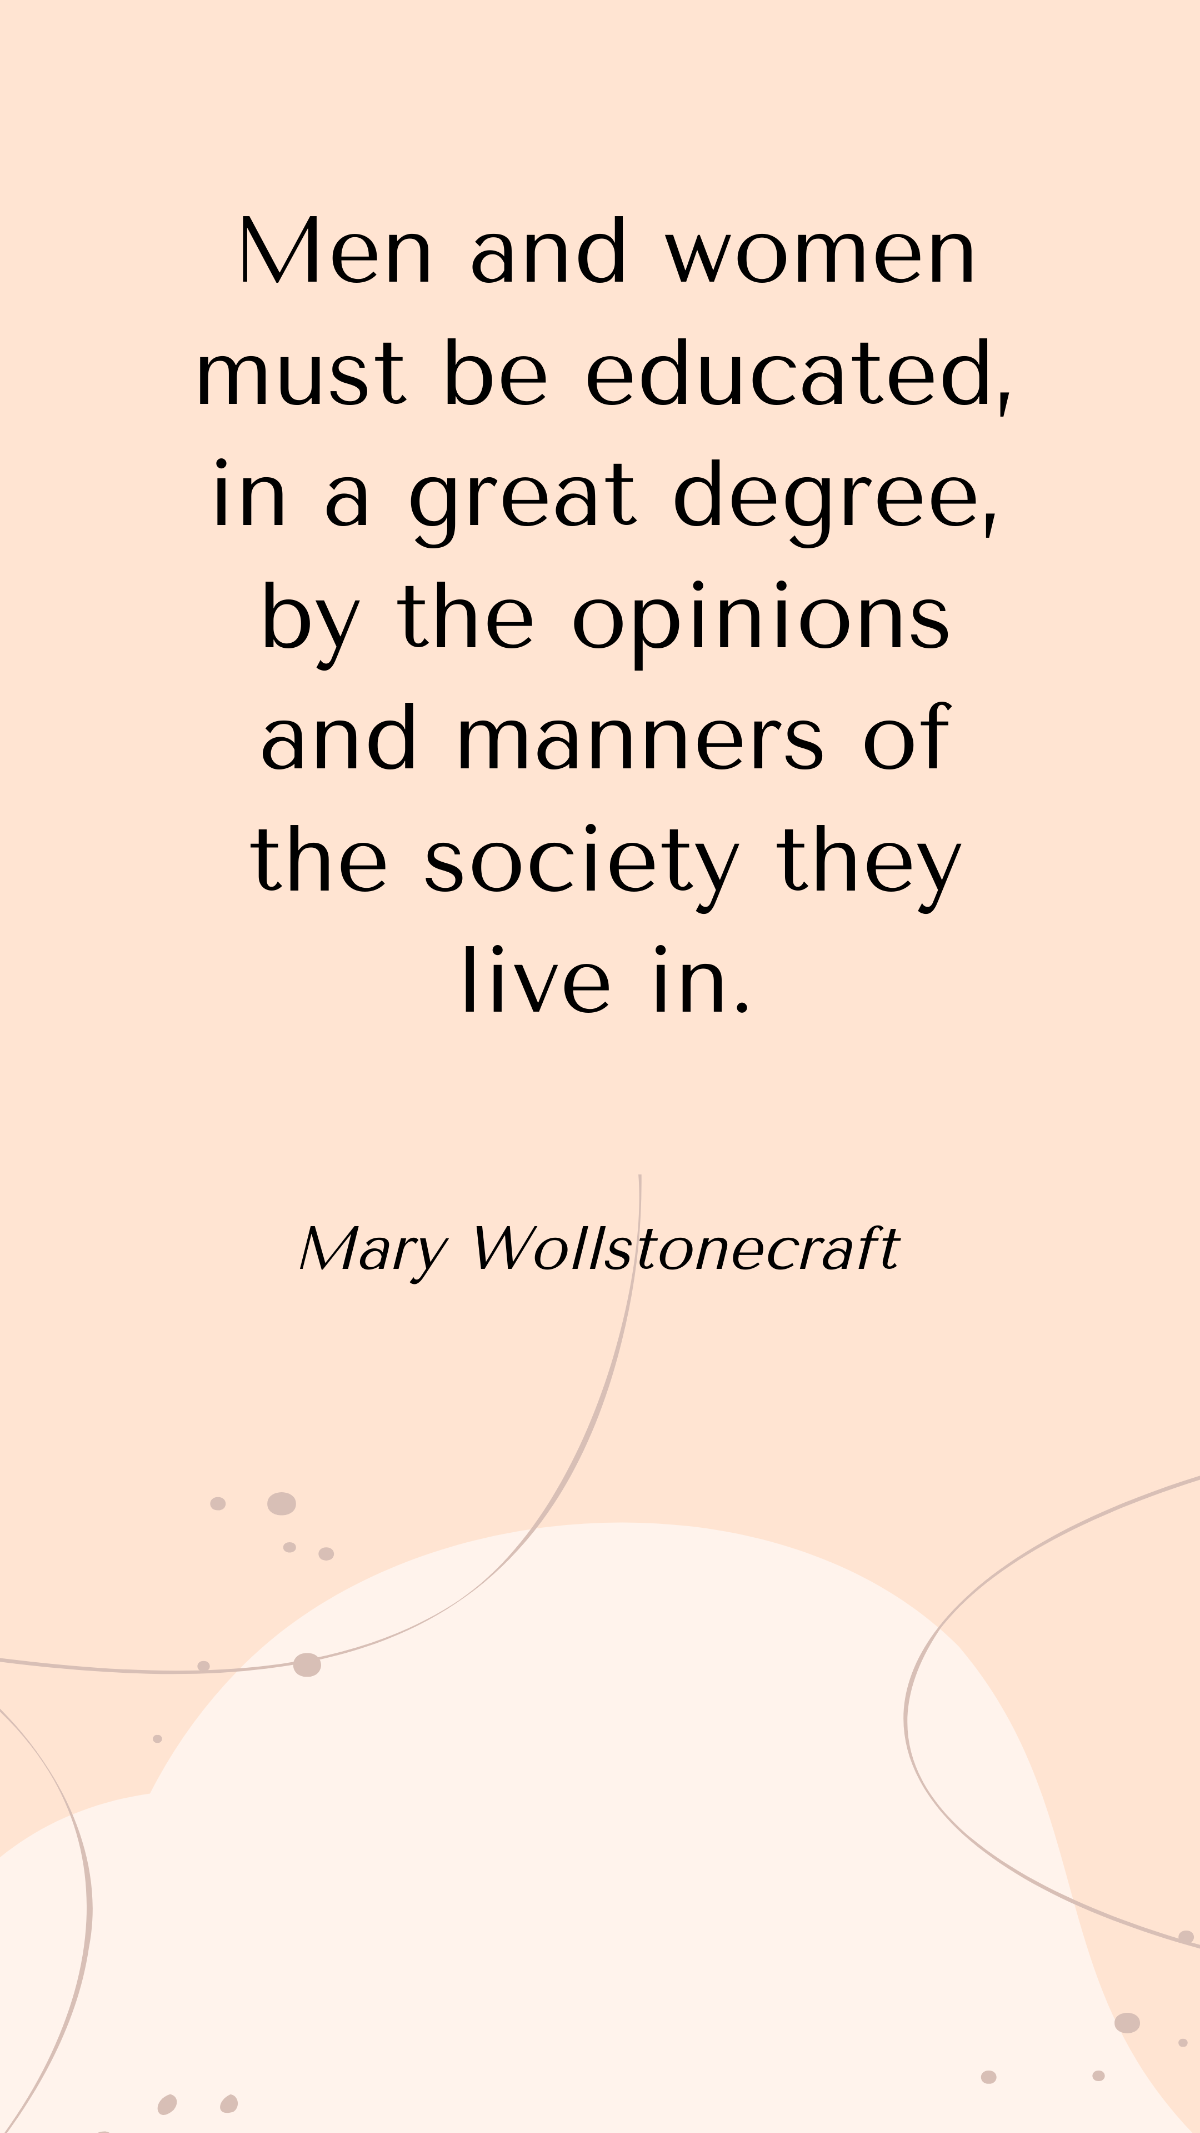 Free Mary Wollstonecraft - Men and women must be educated, in a great degree, by the opinions and manners of the society they live in. Template